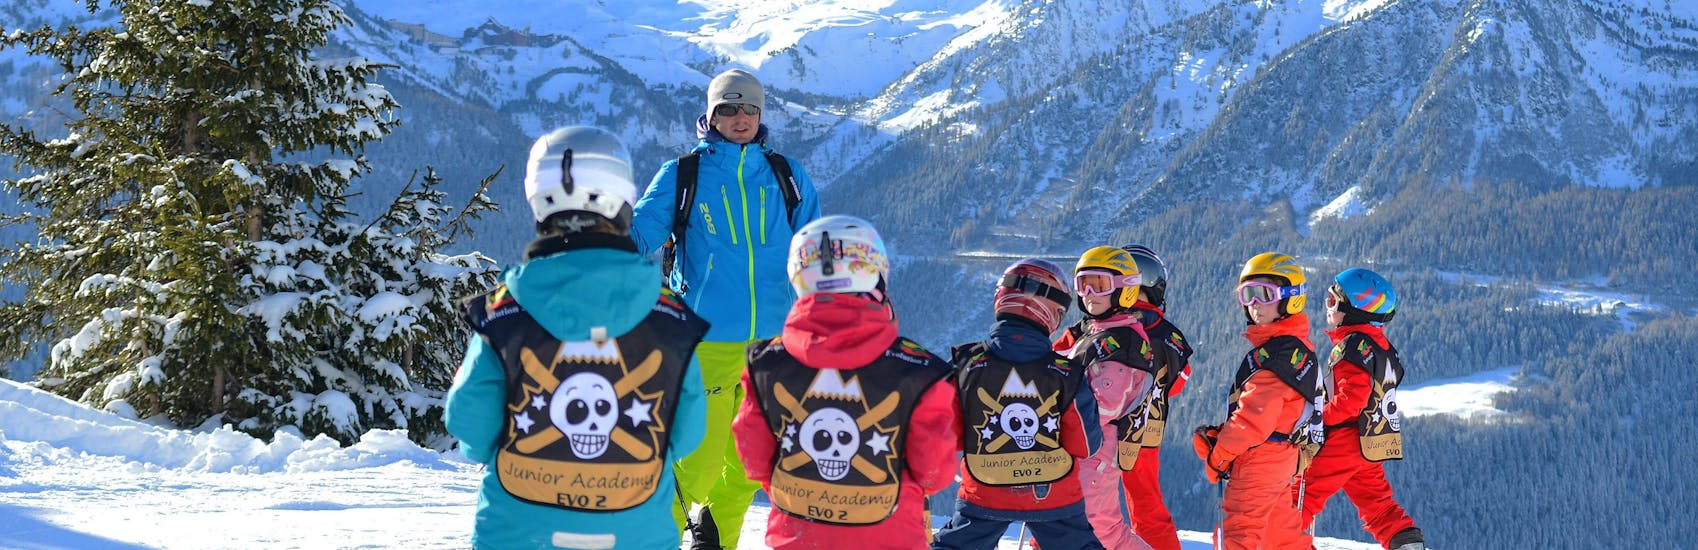 Little kids are doing Kids Ski Lessons (4-5 y.) for First Timers with Evolution 2 La Clusaz.